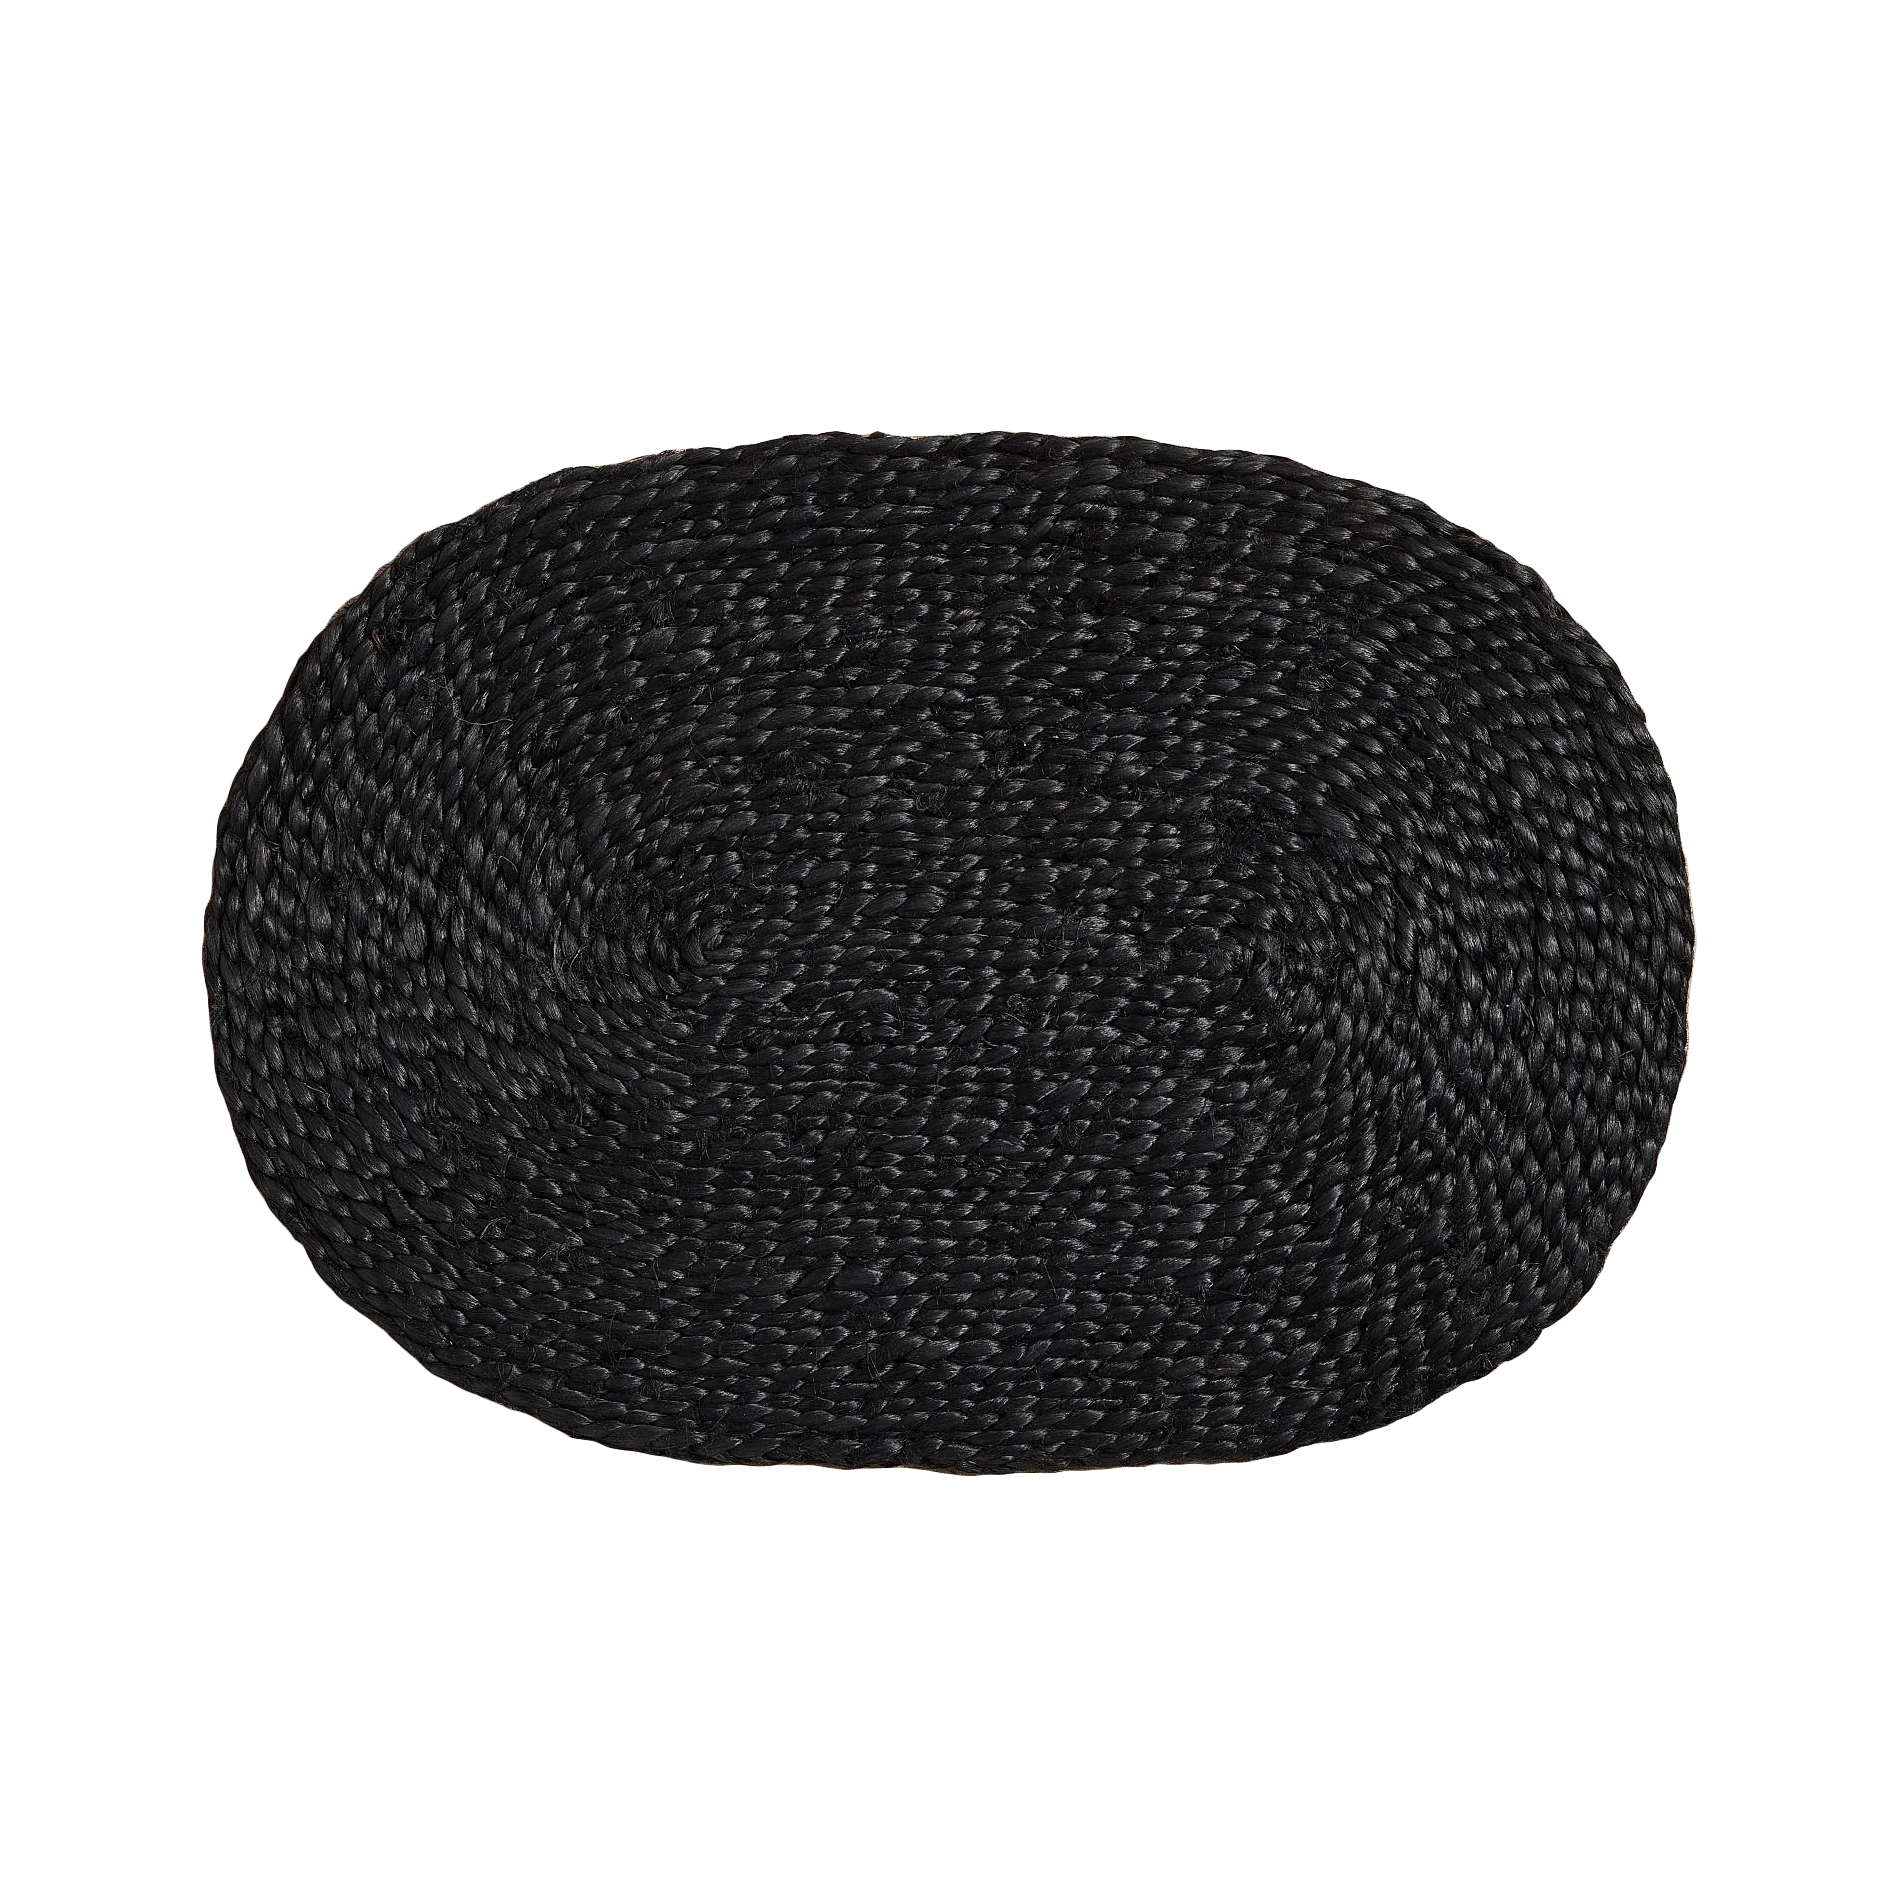 Pottery Barn Mori Oval Coil Handwoven Jute Placemats